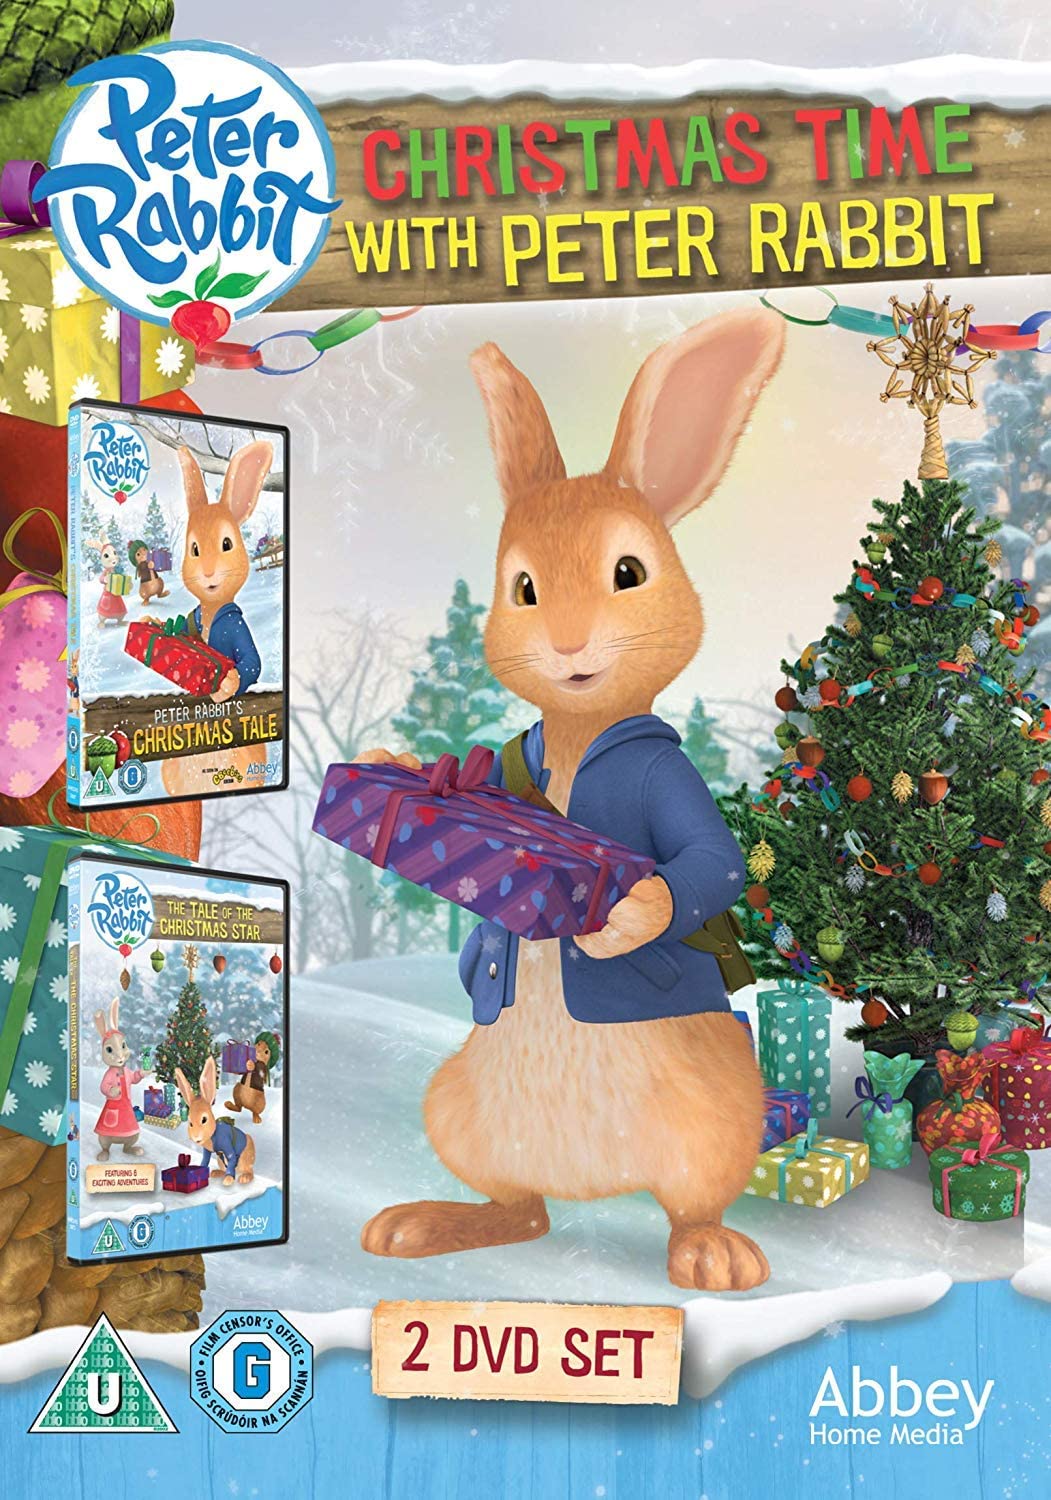 Peter Rabbit - Christmas Time With Peter Rabbit - Family/Comedy [DVD]